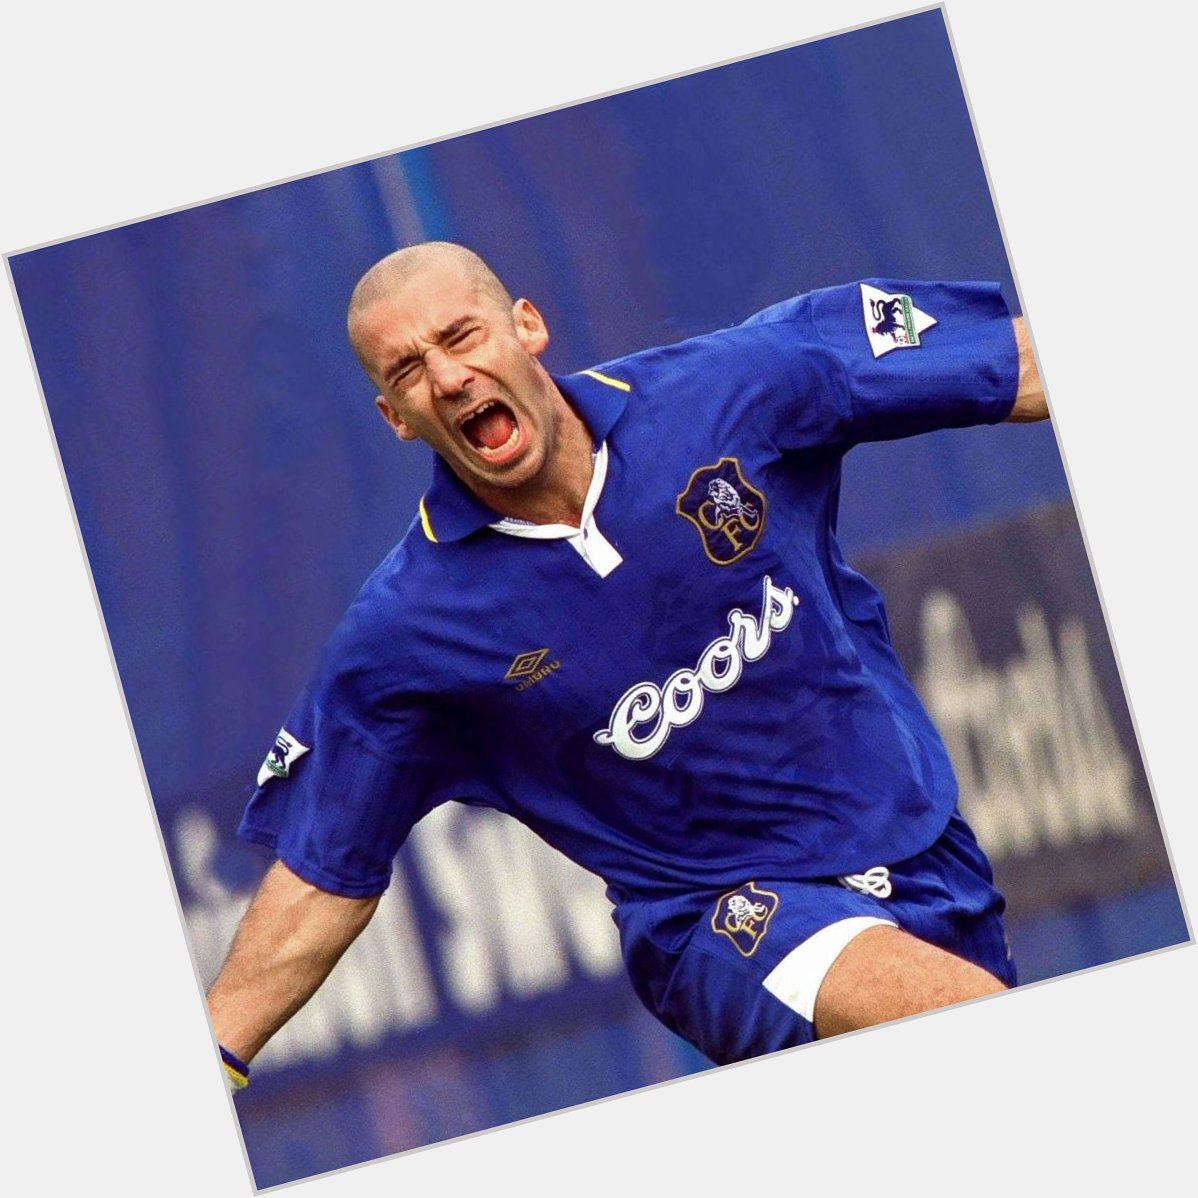 Happy birthday to former player & Manager Gianluca Vialli, who is 56 today. 